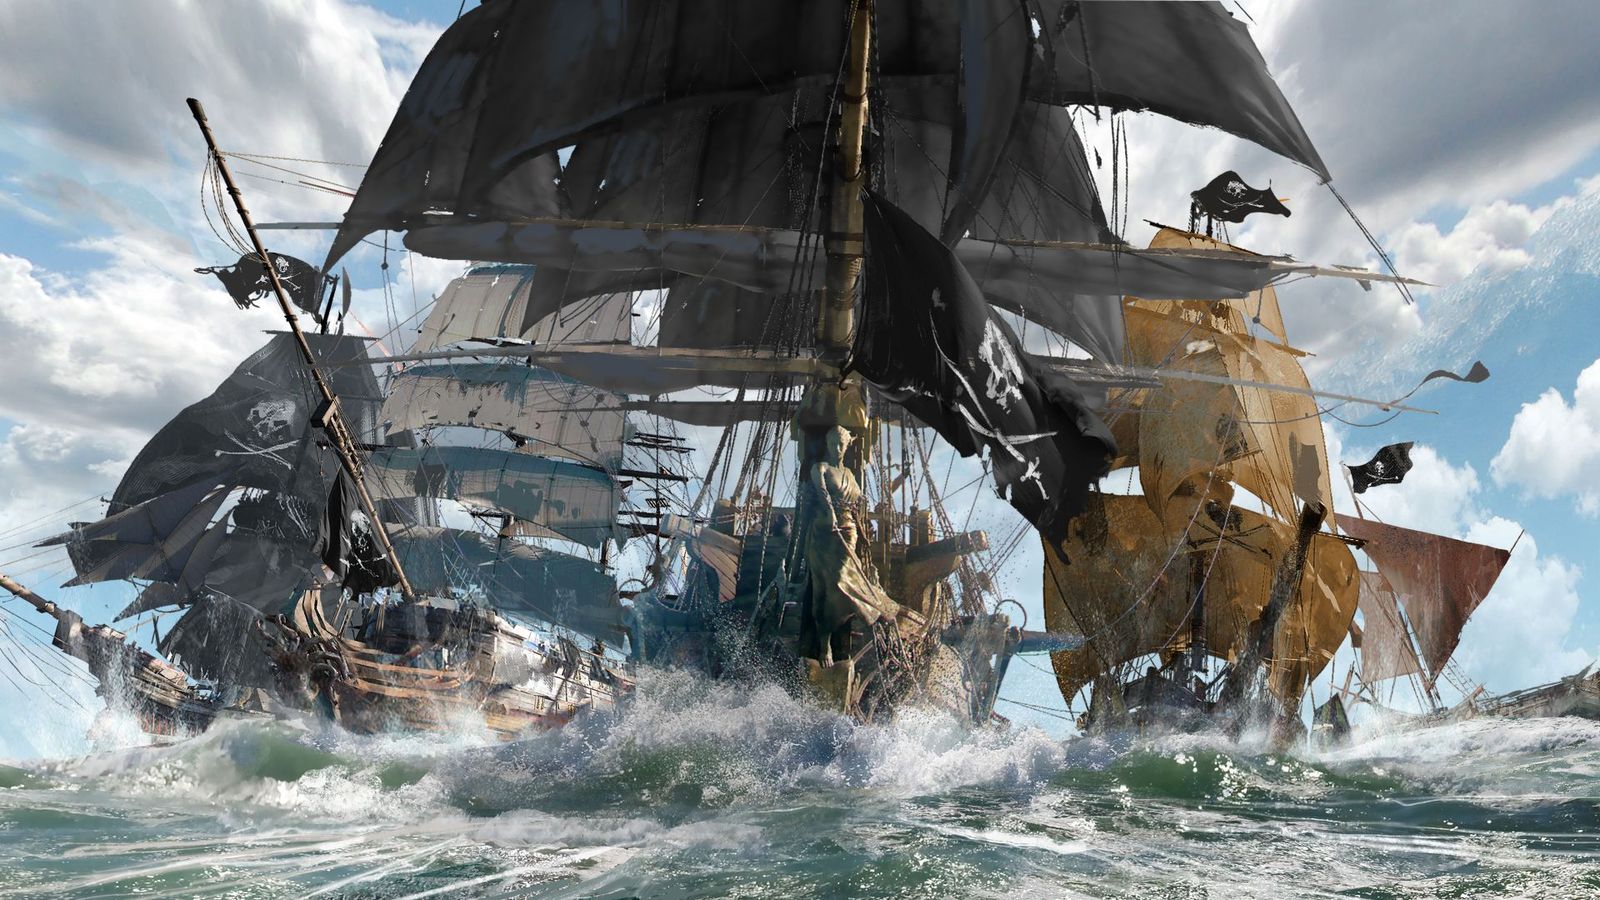 Skull and Bones ships sailing close together in rough seas